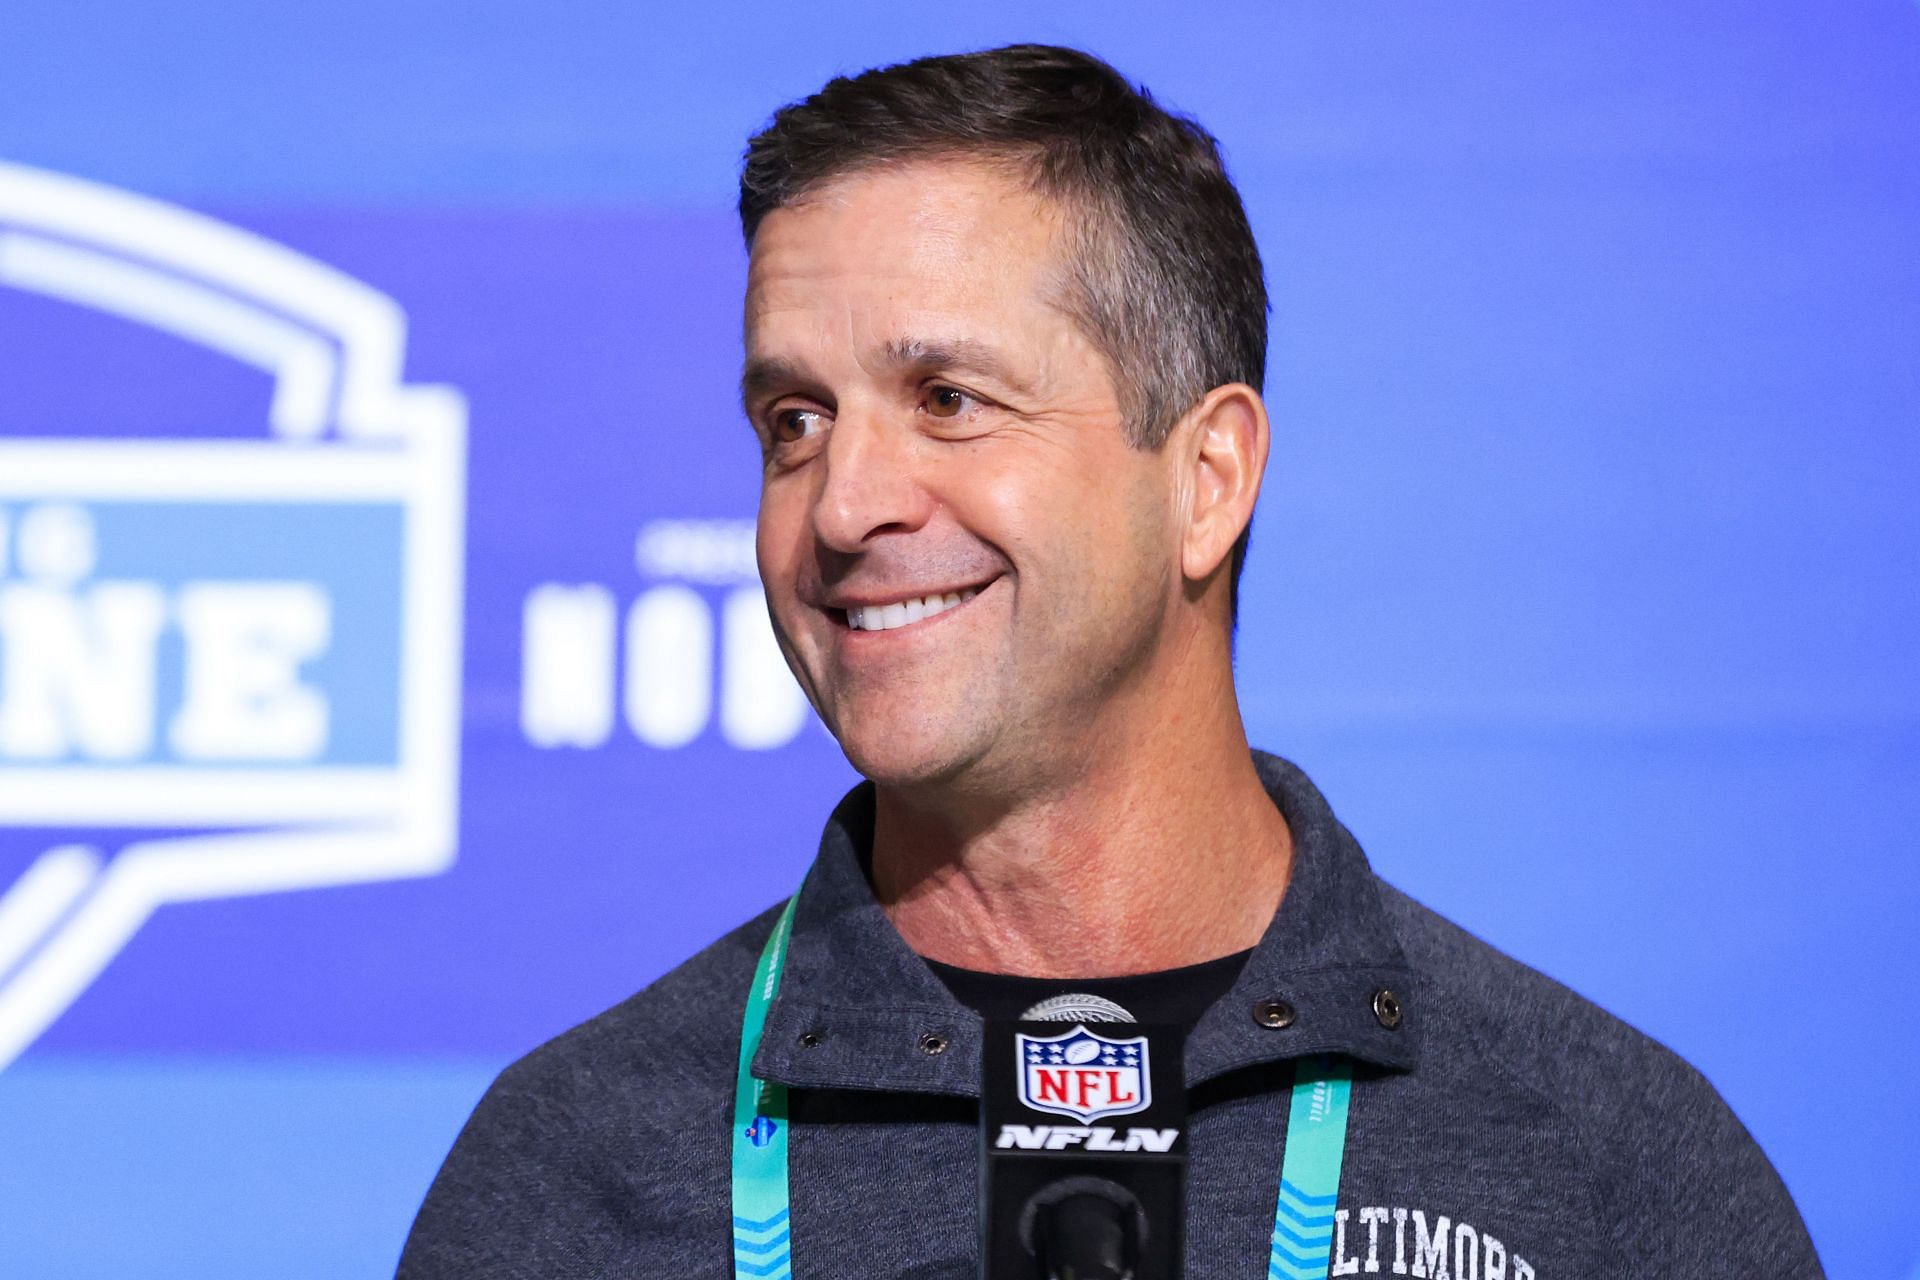 John Harbaugh at the 2023 NFL Combine